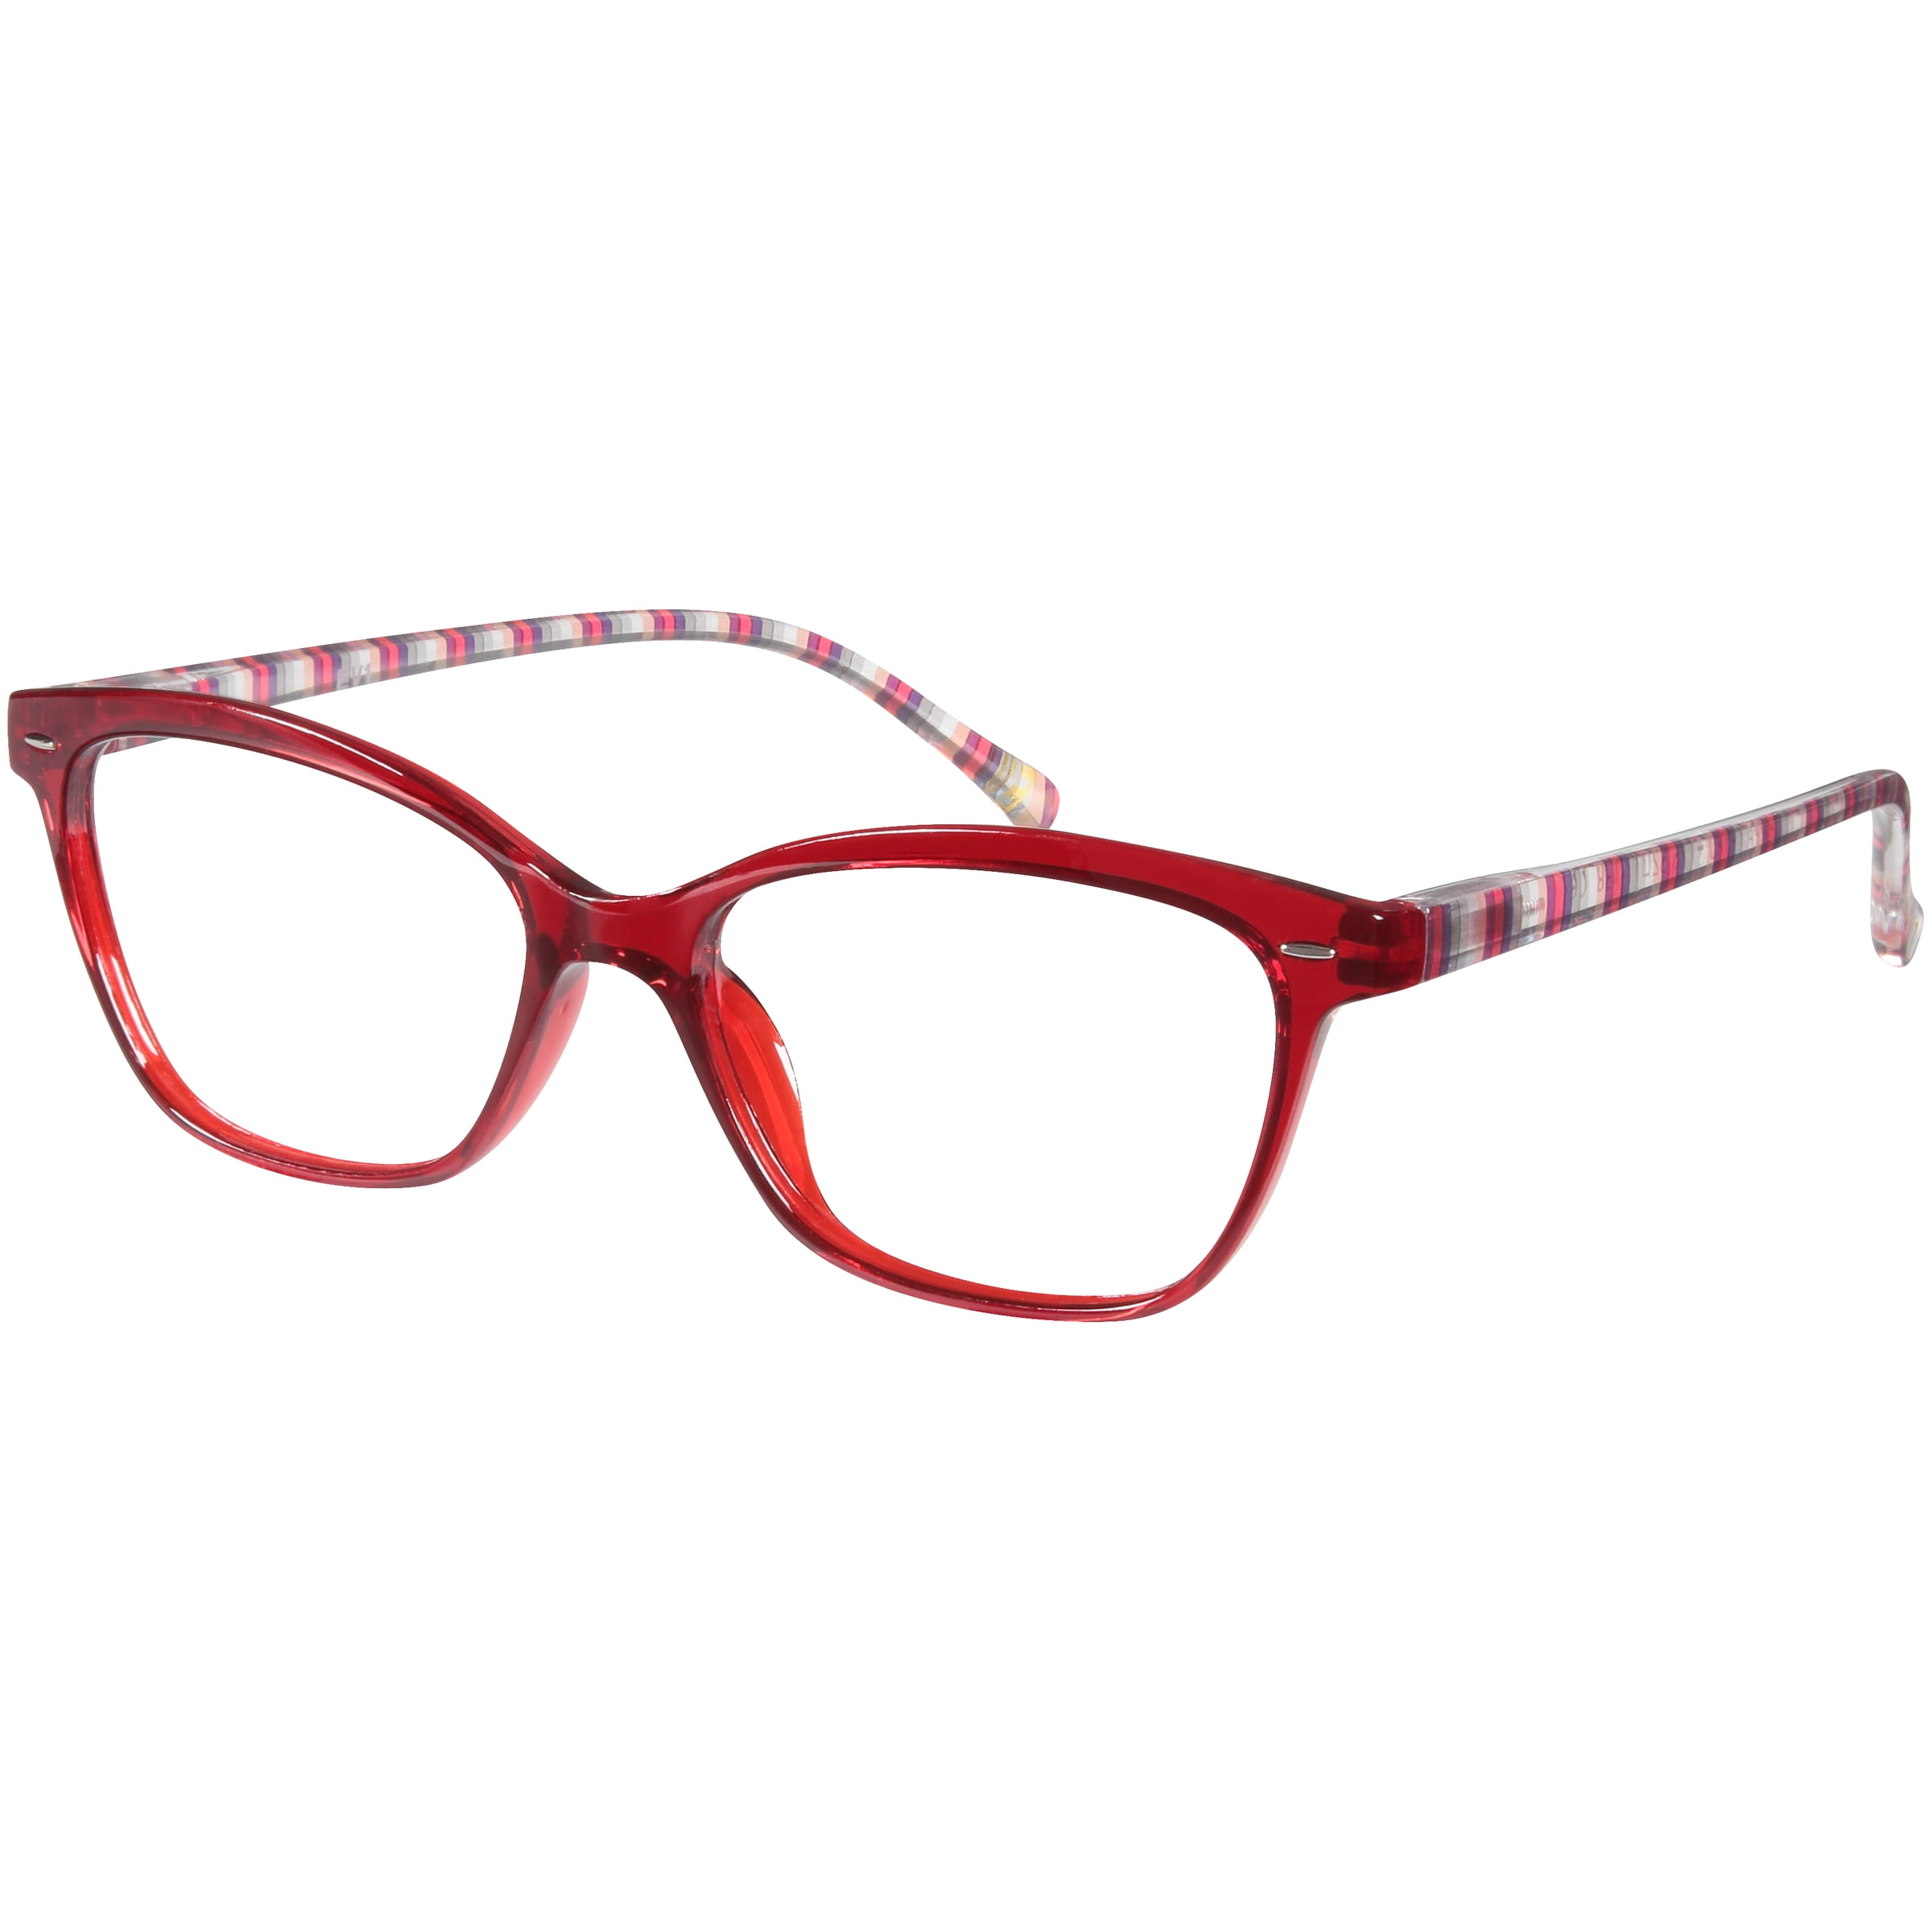 EV1 Pippa Crystal Red +1.75 Reading Glasses with Case